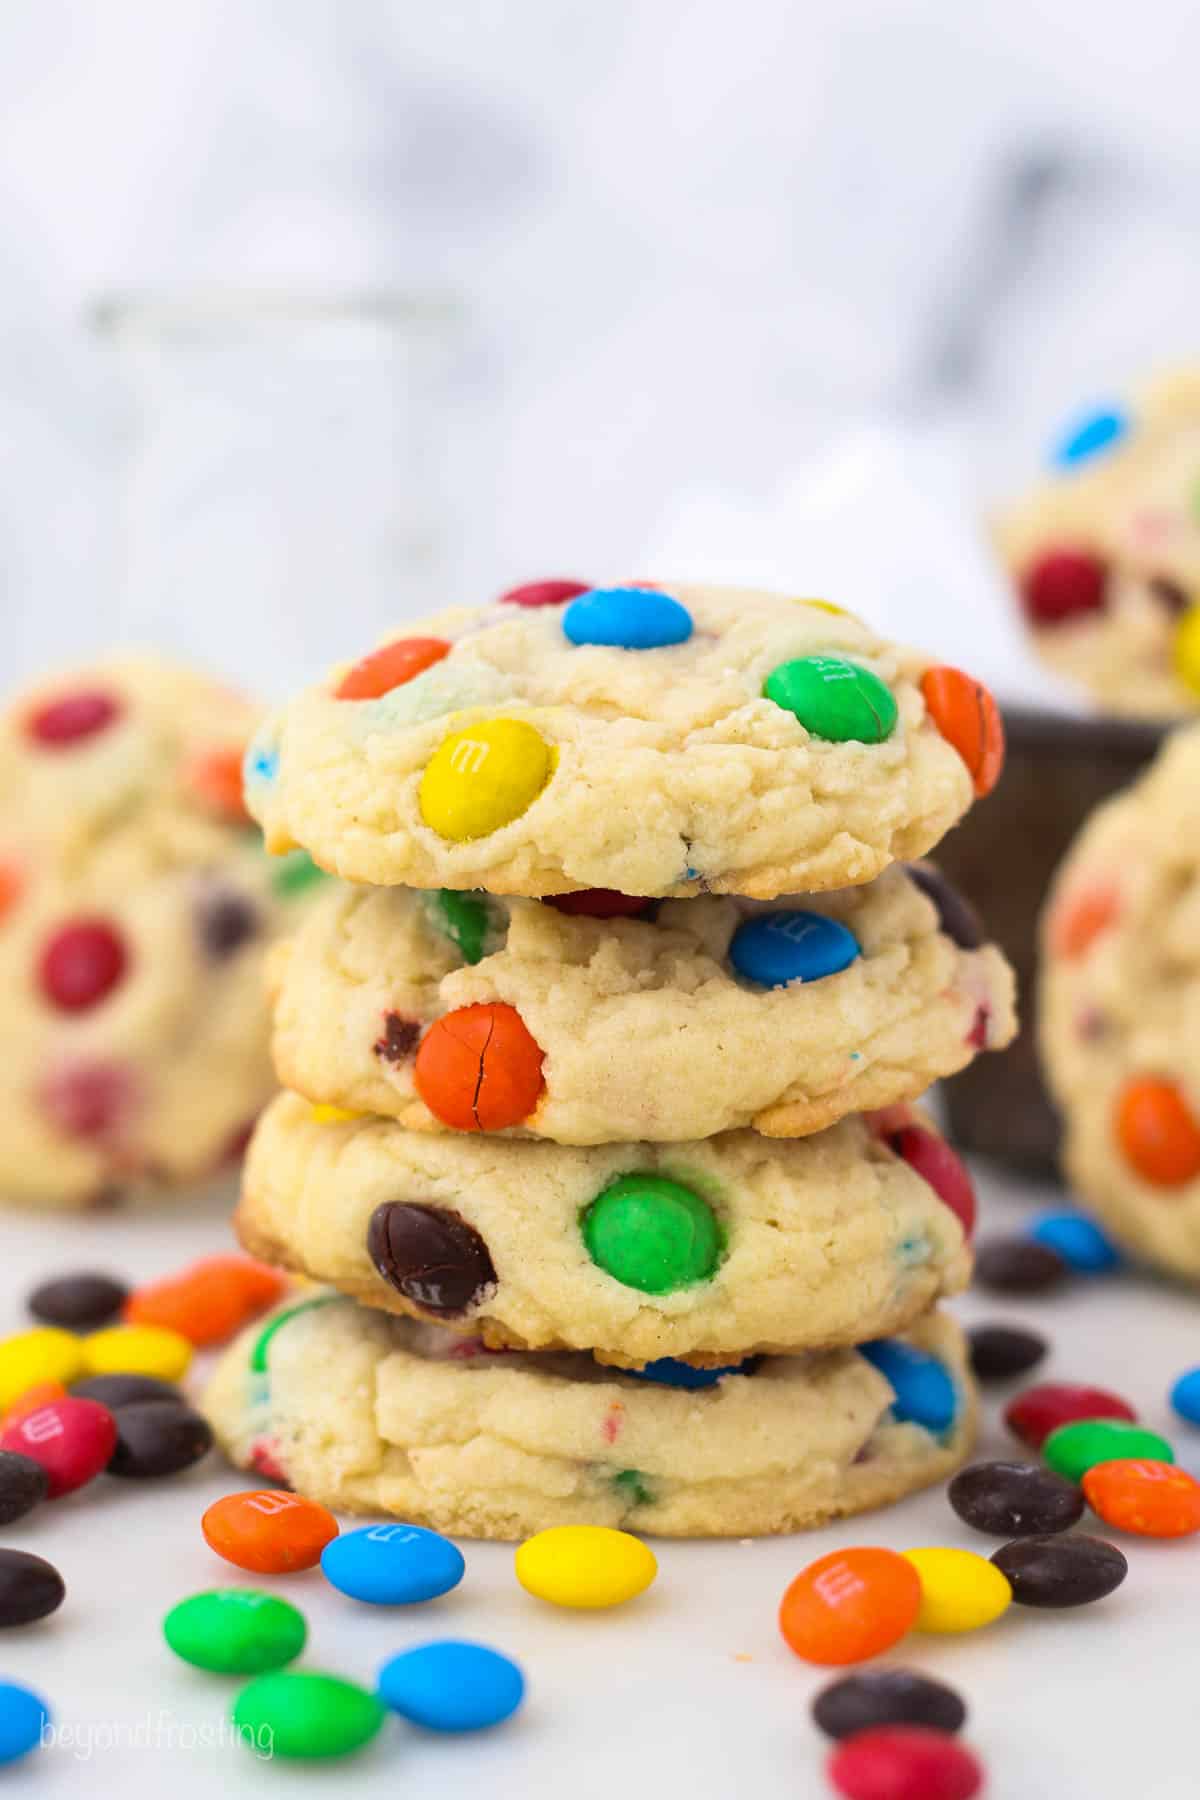 A stack of four M&M cookies surrounded by M&M candies on a countertop.